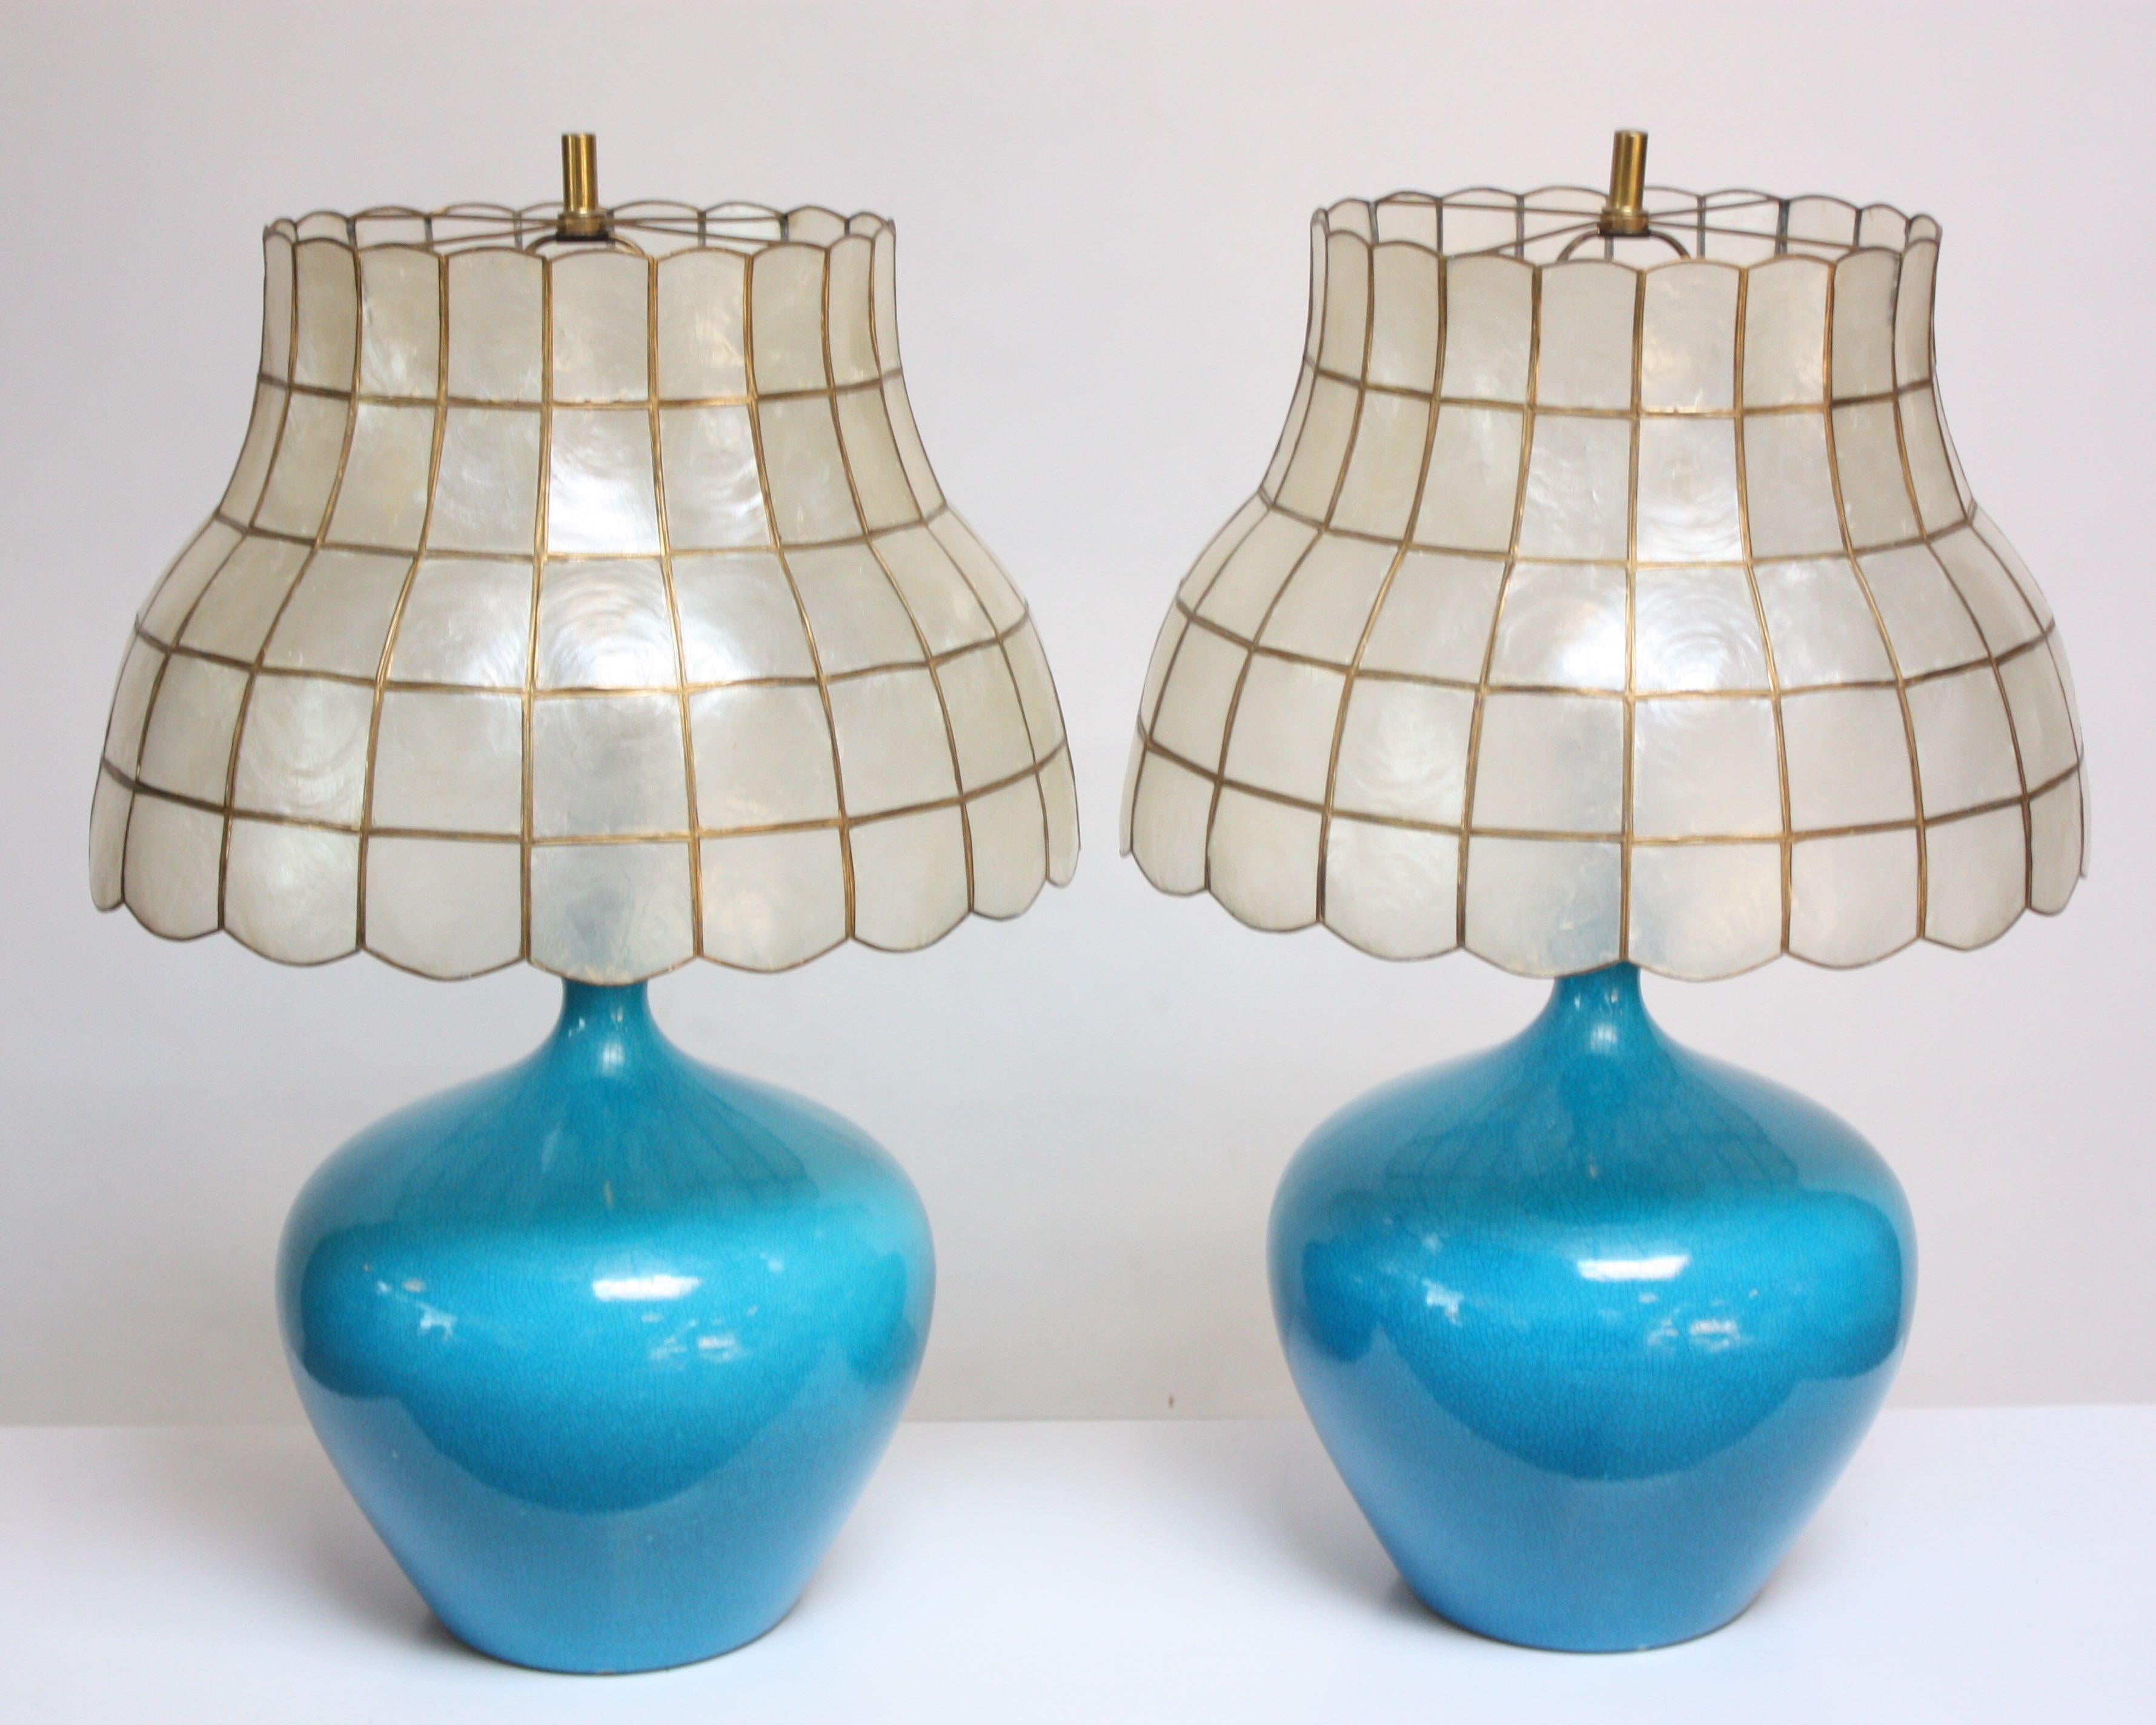 One sold, one available: striking turquoise table lamp in a crackle glaze finish with solid brass accents. Lamp has been paired with a shade composed of capiz shell (windowpane oysters) secured in a brass frame. Lamp is in very good, vintage